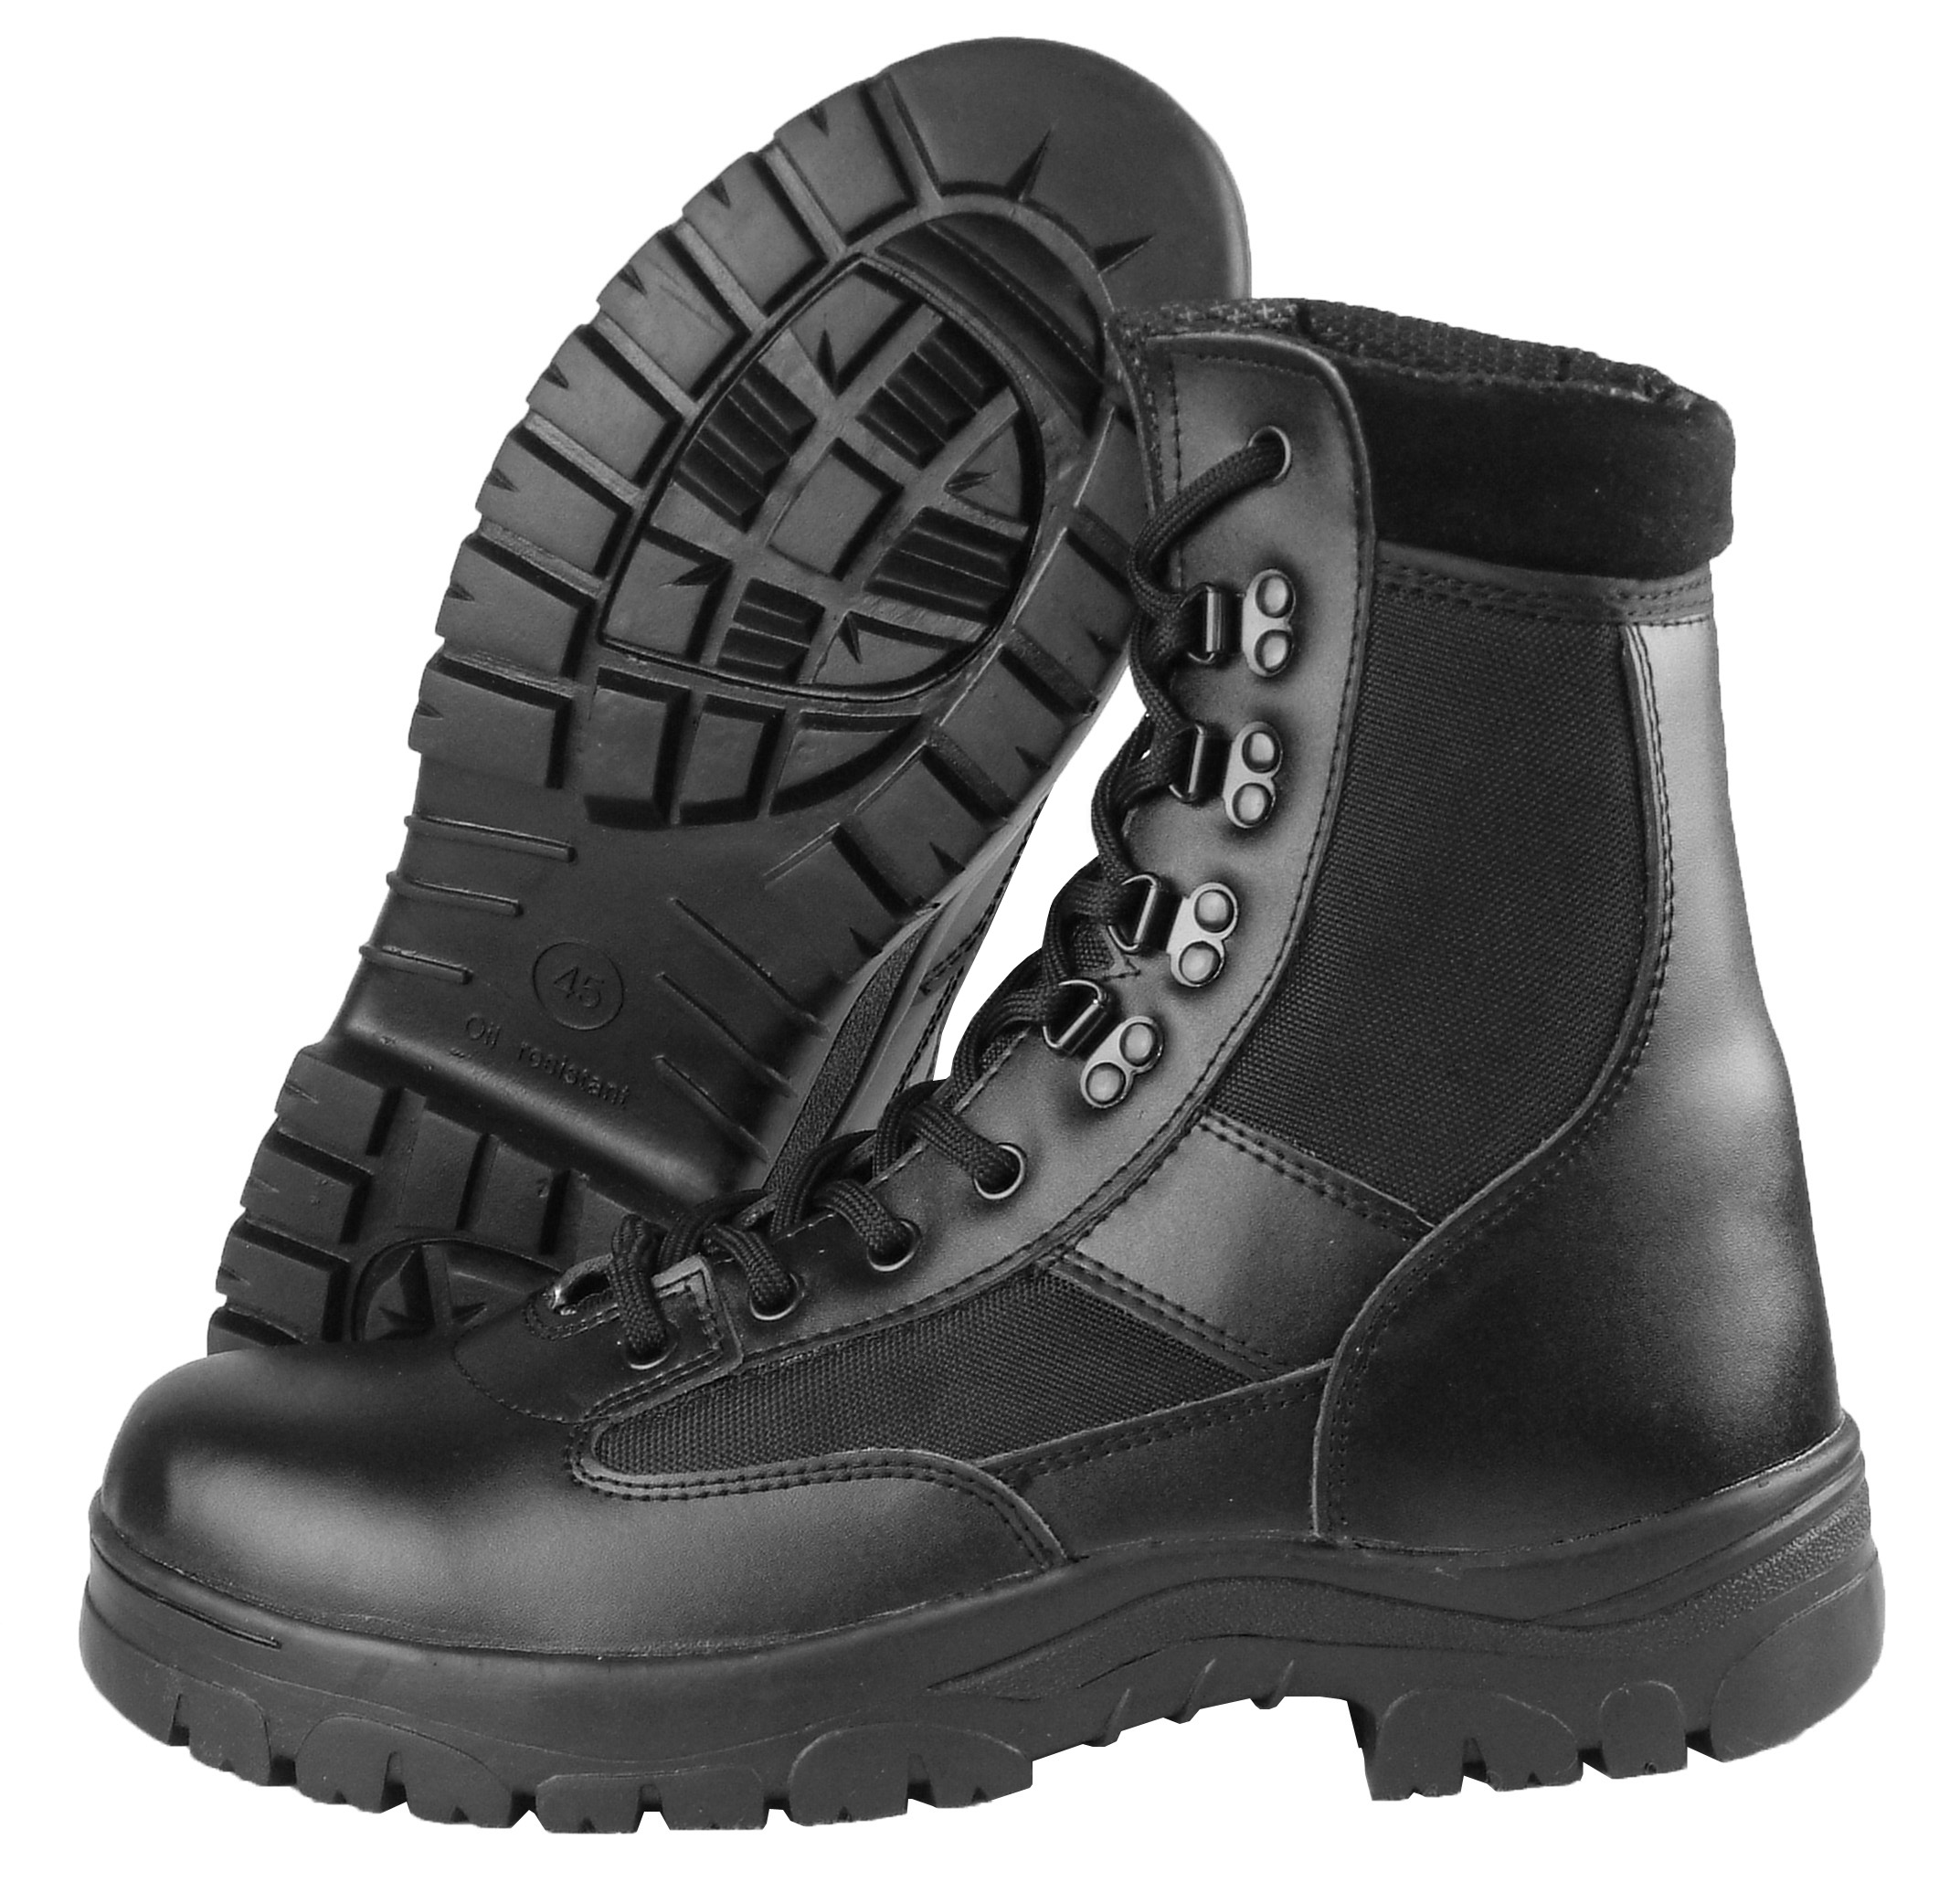 Thinsulate Patrol Boots (Cadet Style)